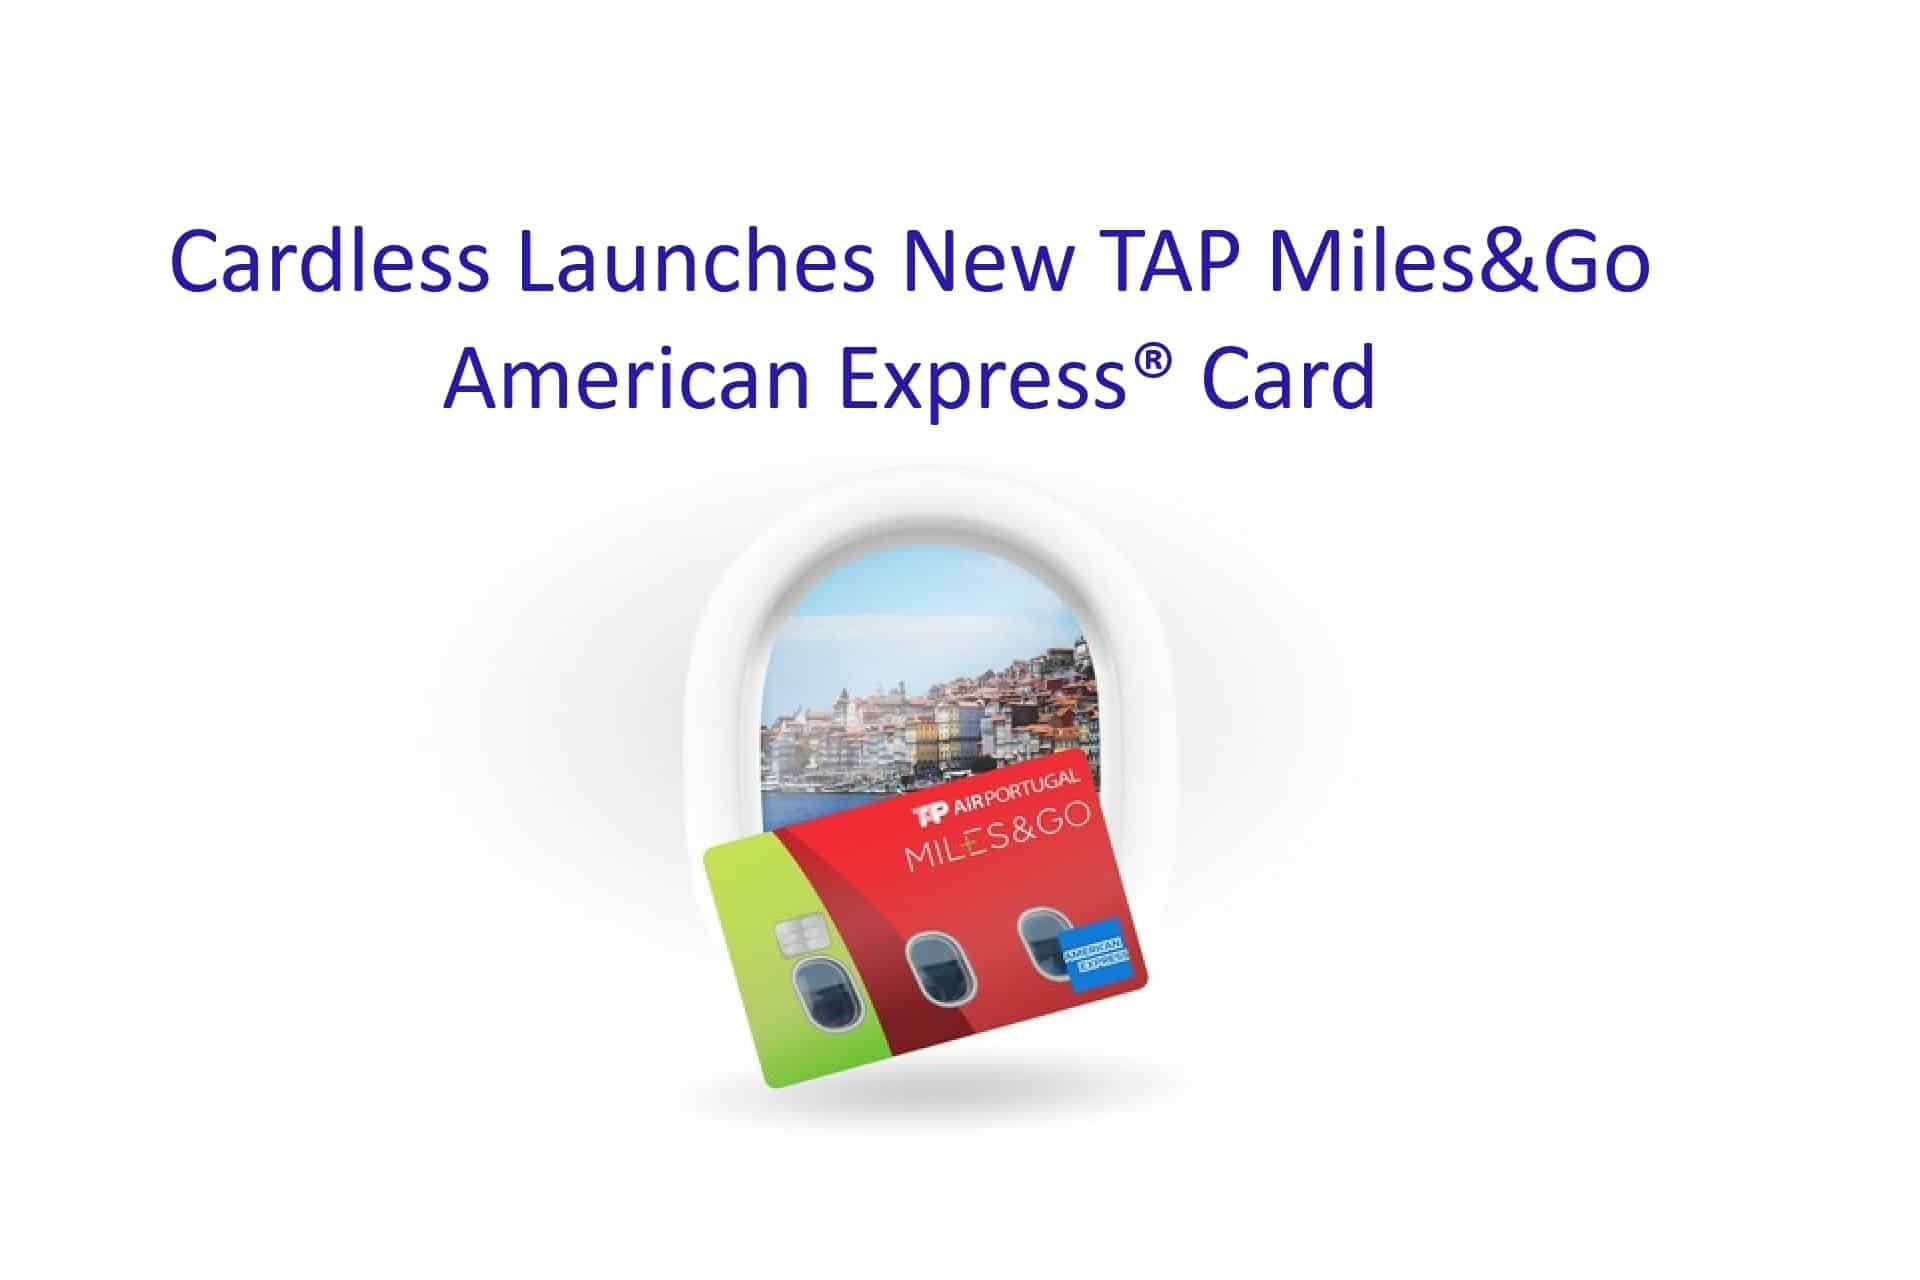 TAP Air Portugal Launches Its First U.S. Credit Card, The TAP Miles&Go American Express® Card from Cardless